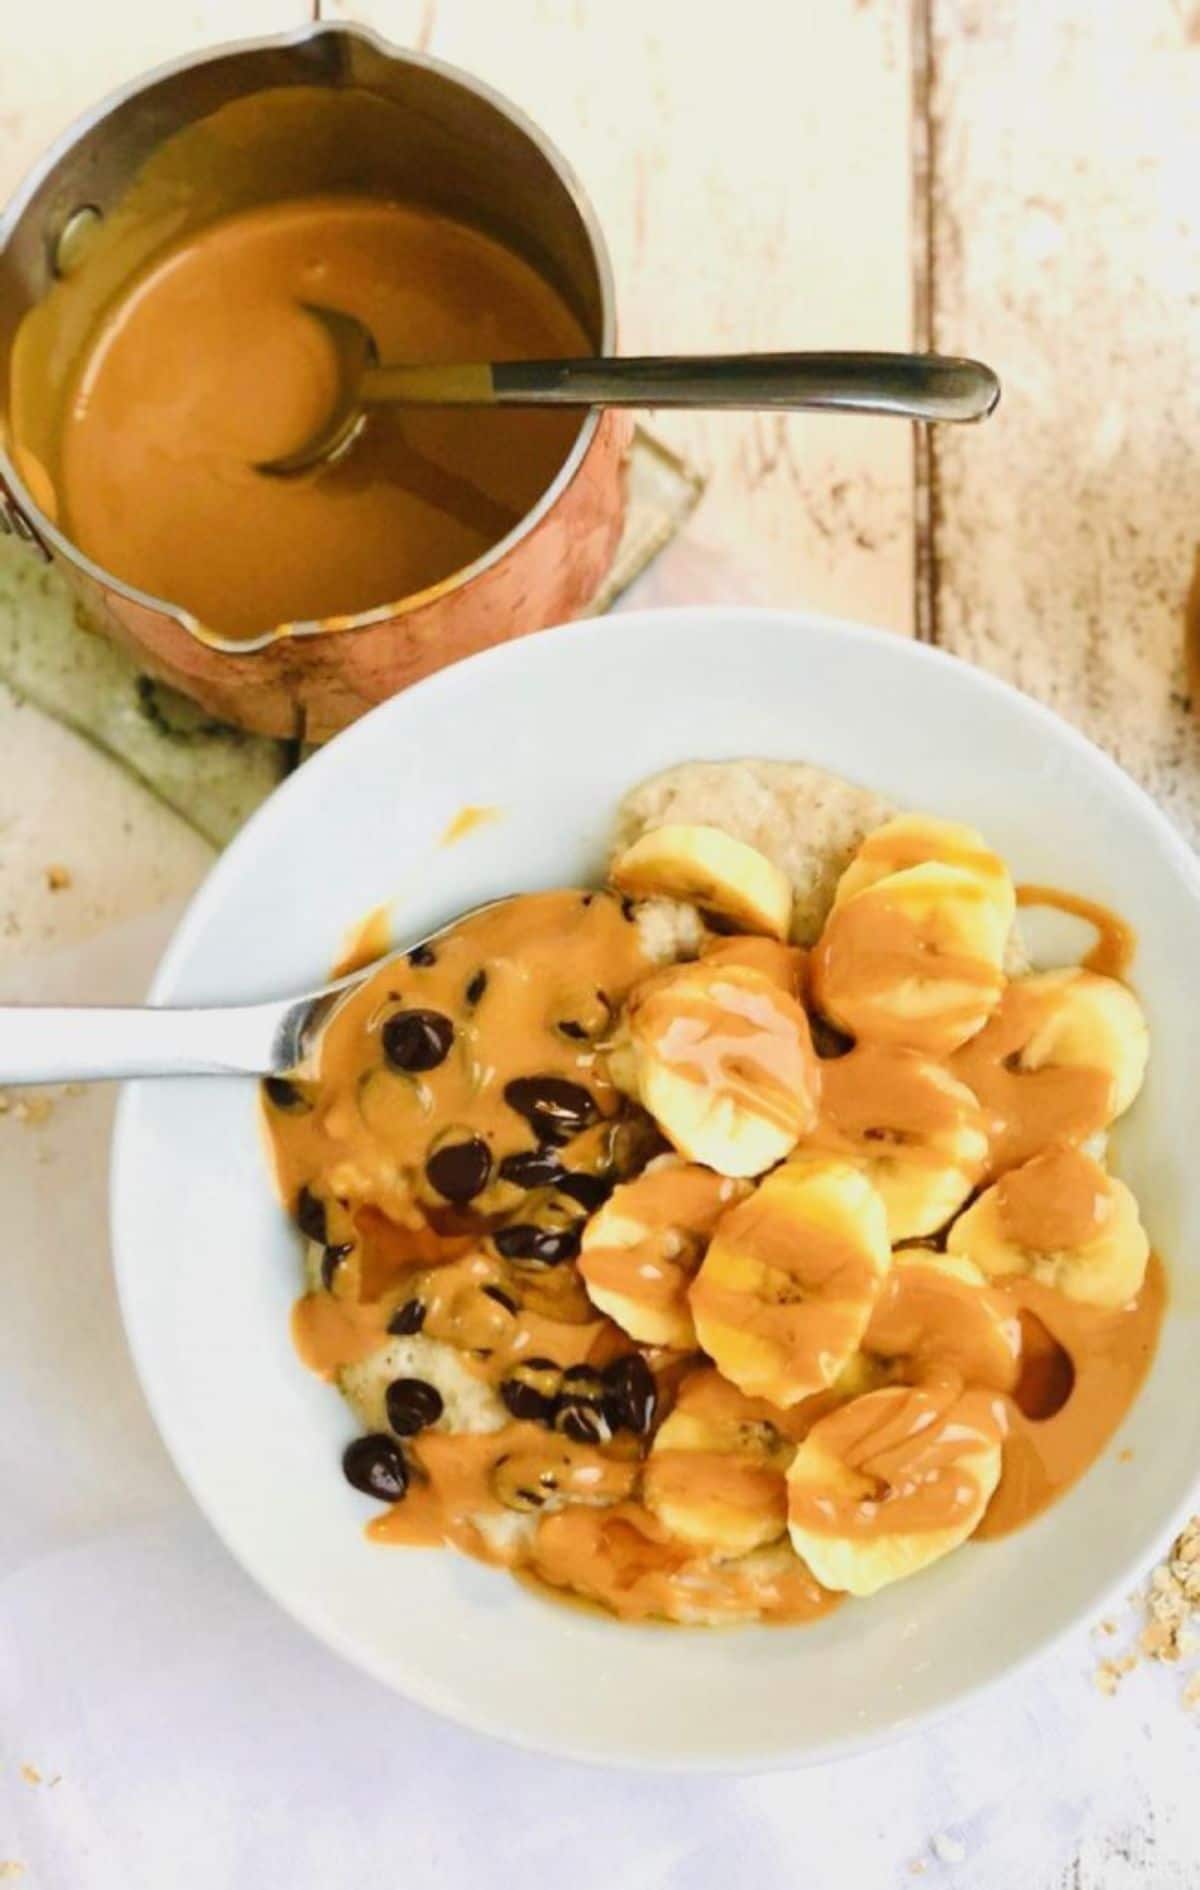 a whote bowl filled with porridge covered in banana slices, raisins, and sauces. A pan of sauce with a spoon in it sits behind